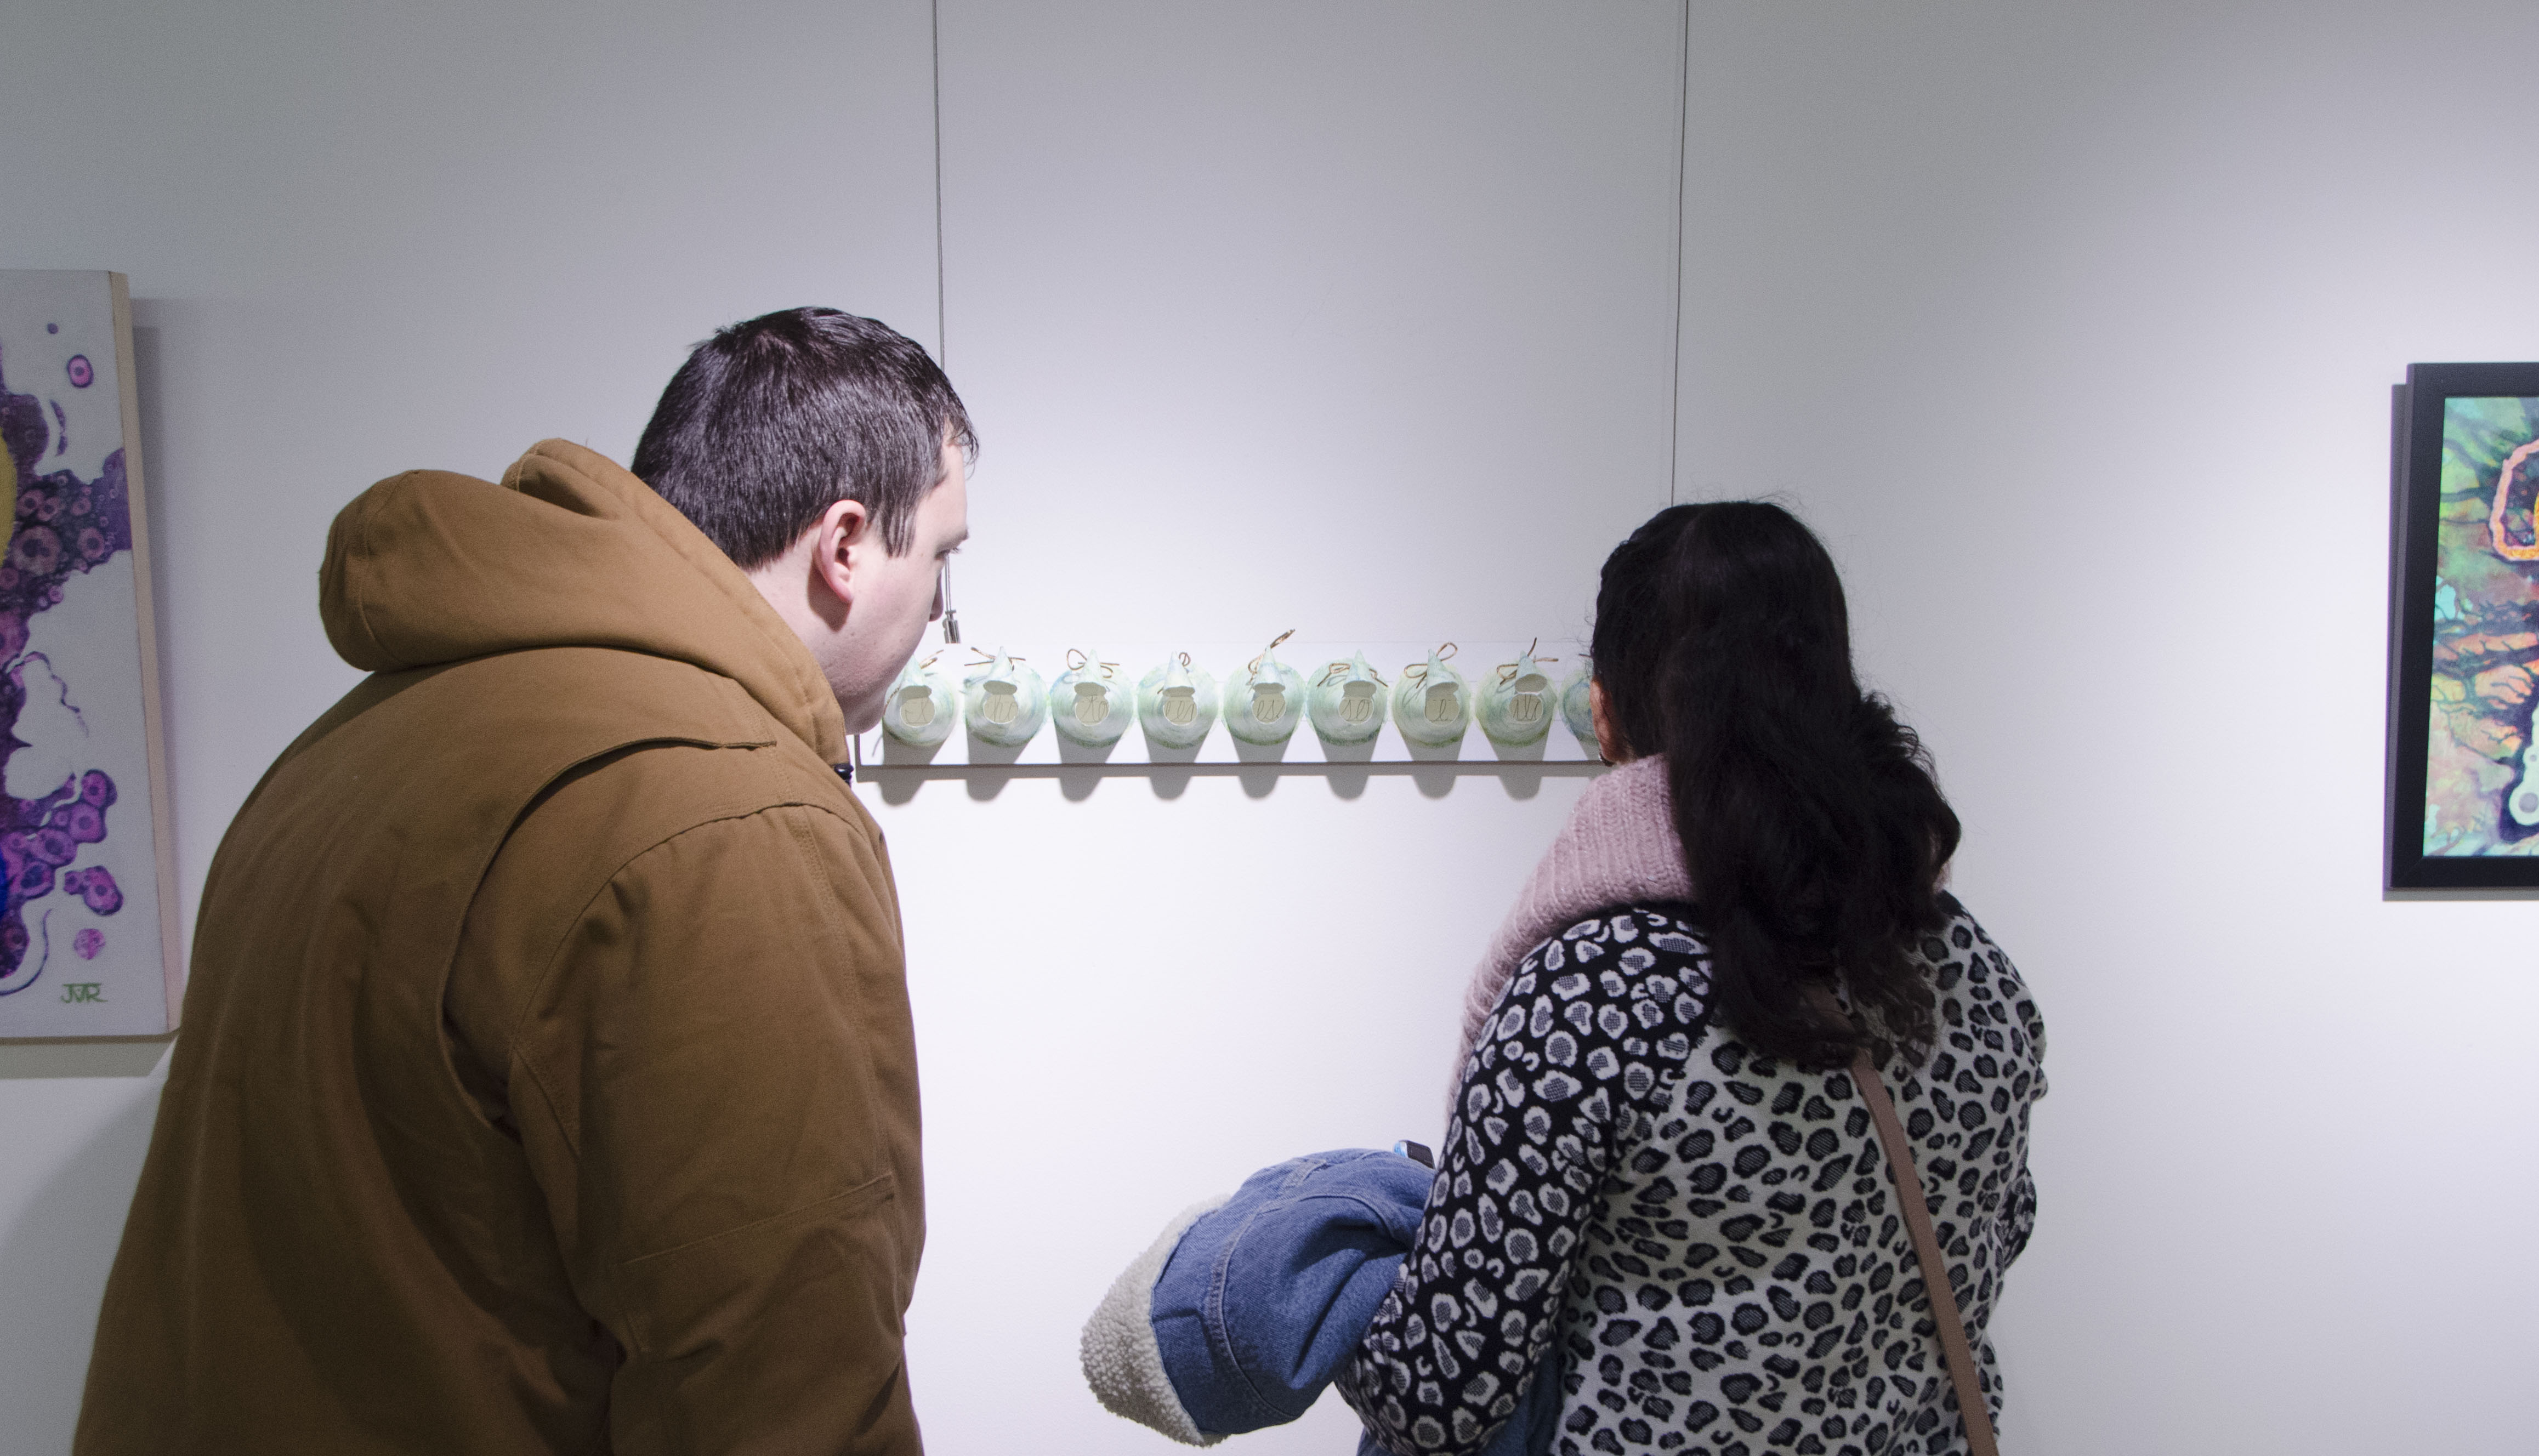 Two guests closely examine "Seem" a piece by EAC member Barbie Perry